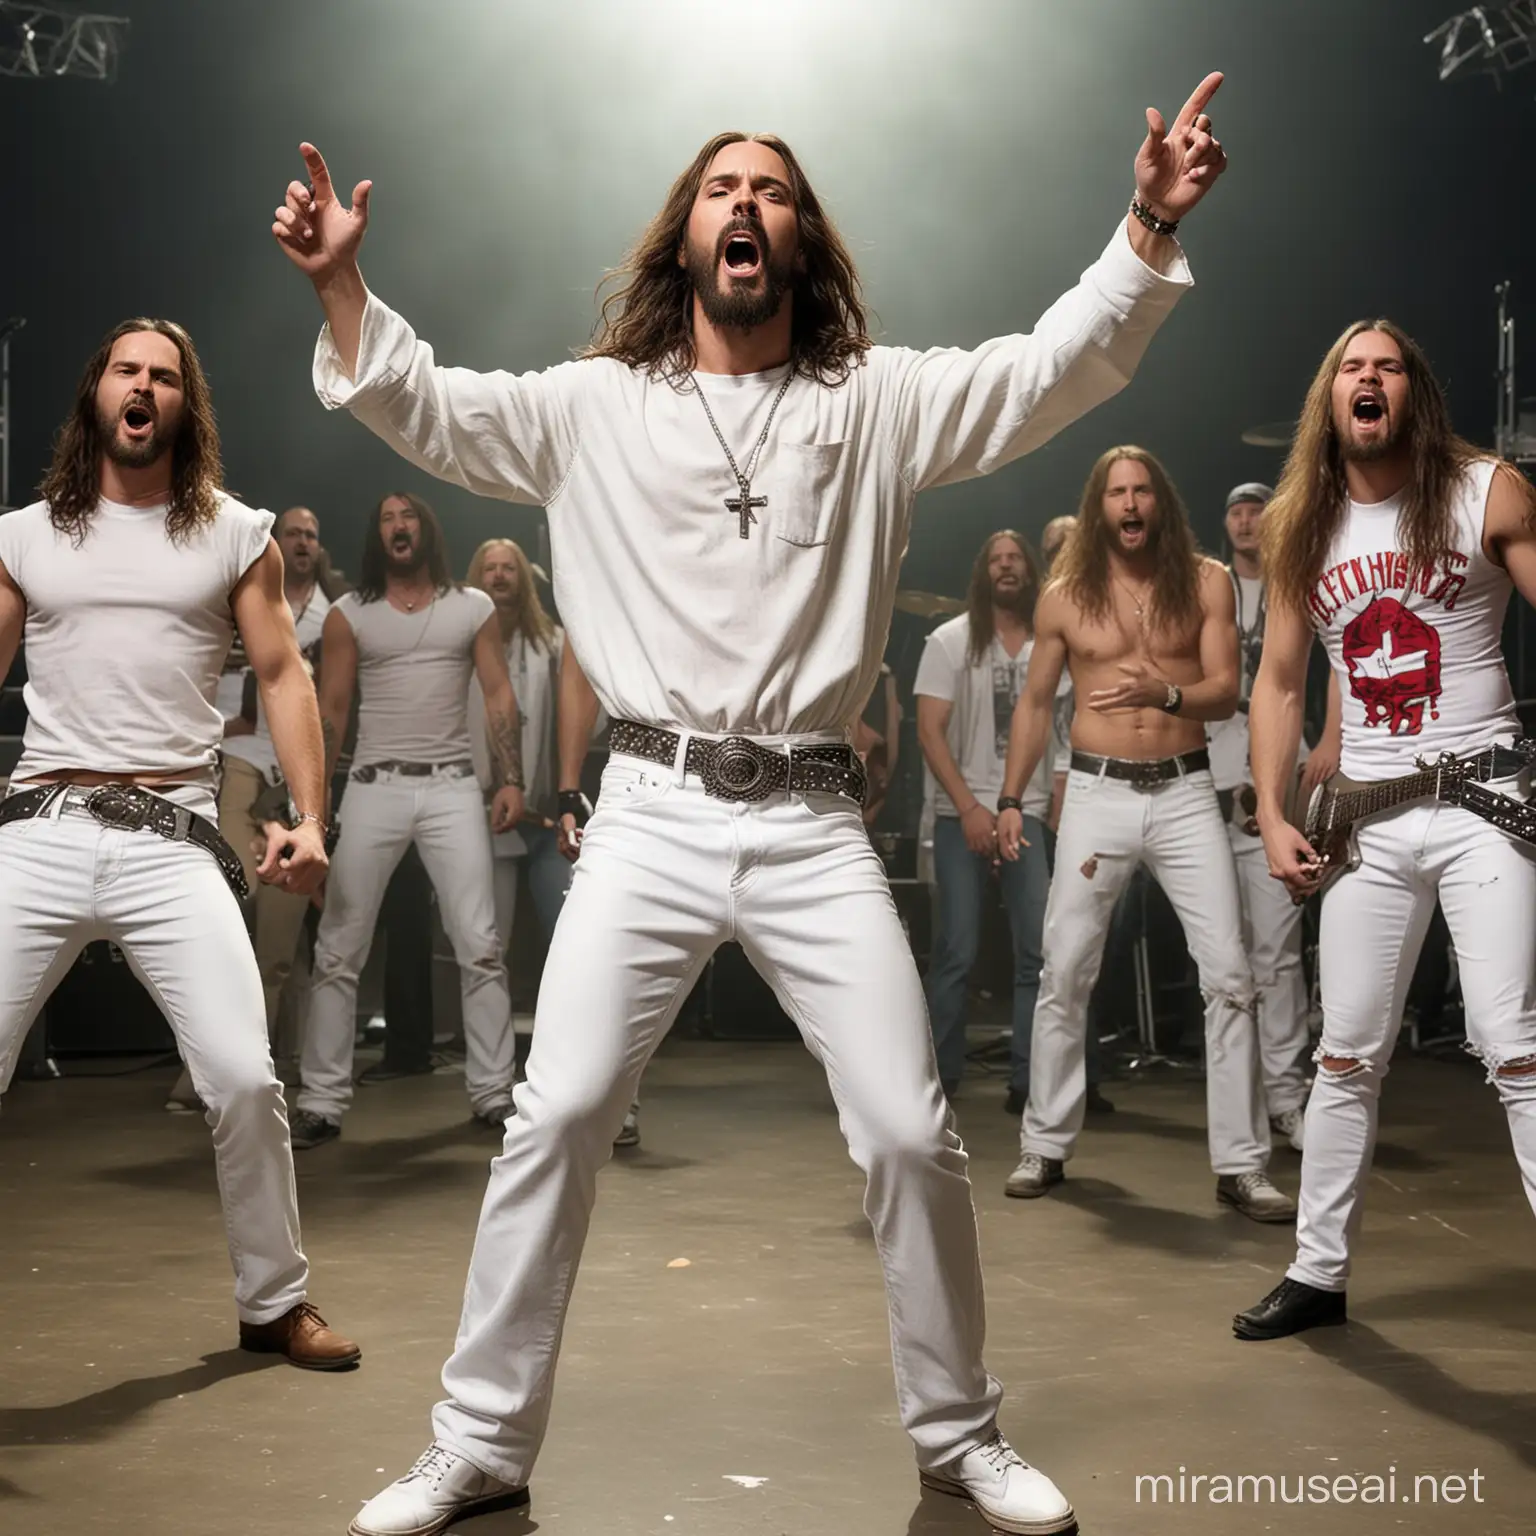 jesus in white jeans singing in a metal band